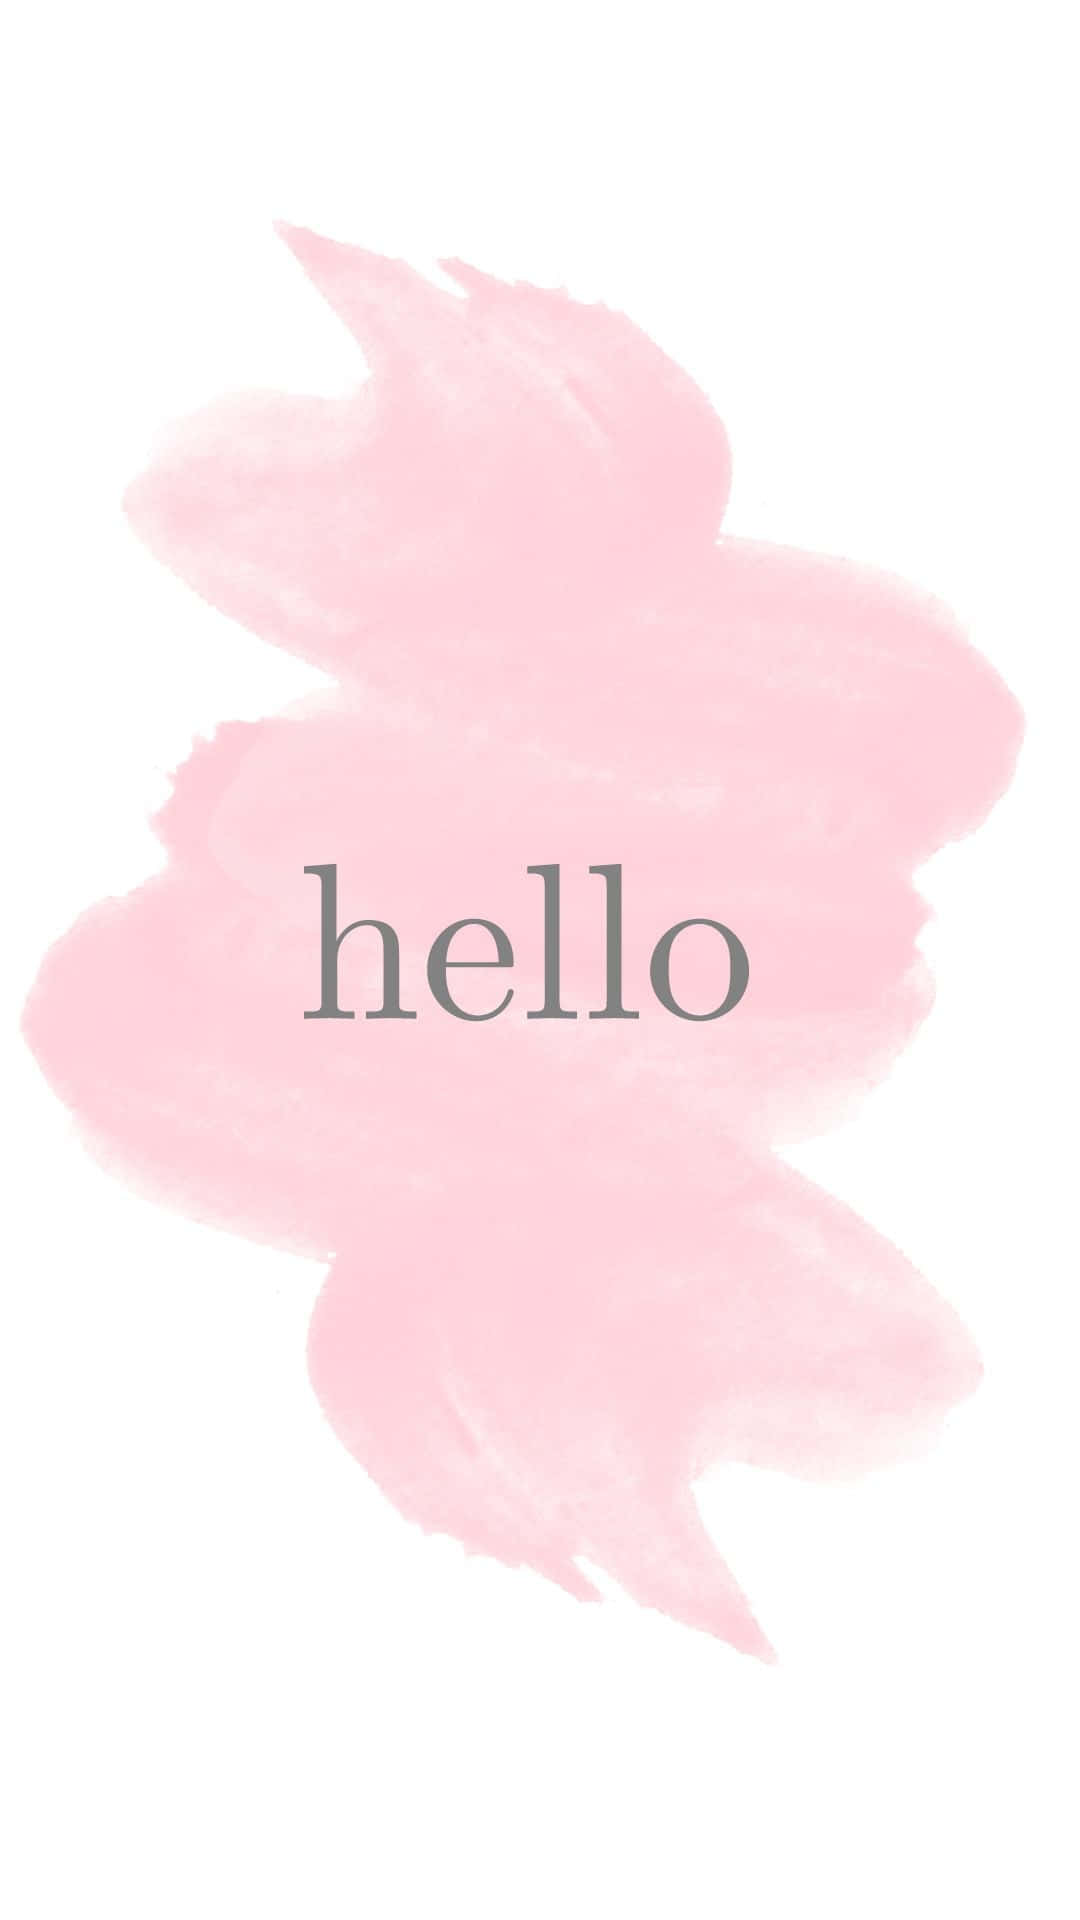 A cheerful greeting of "Hello"